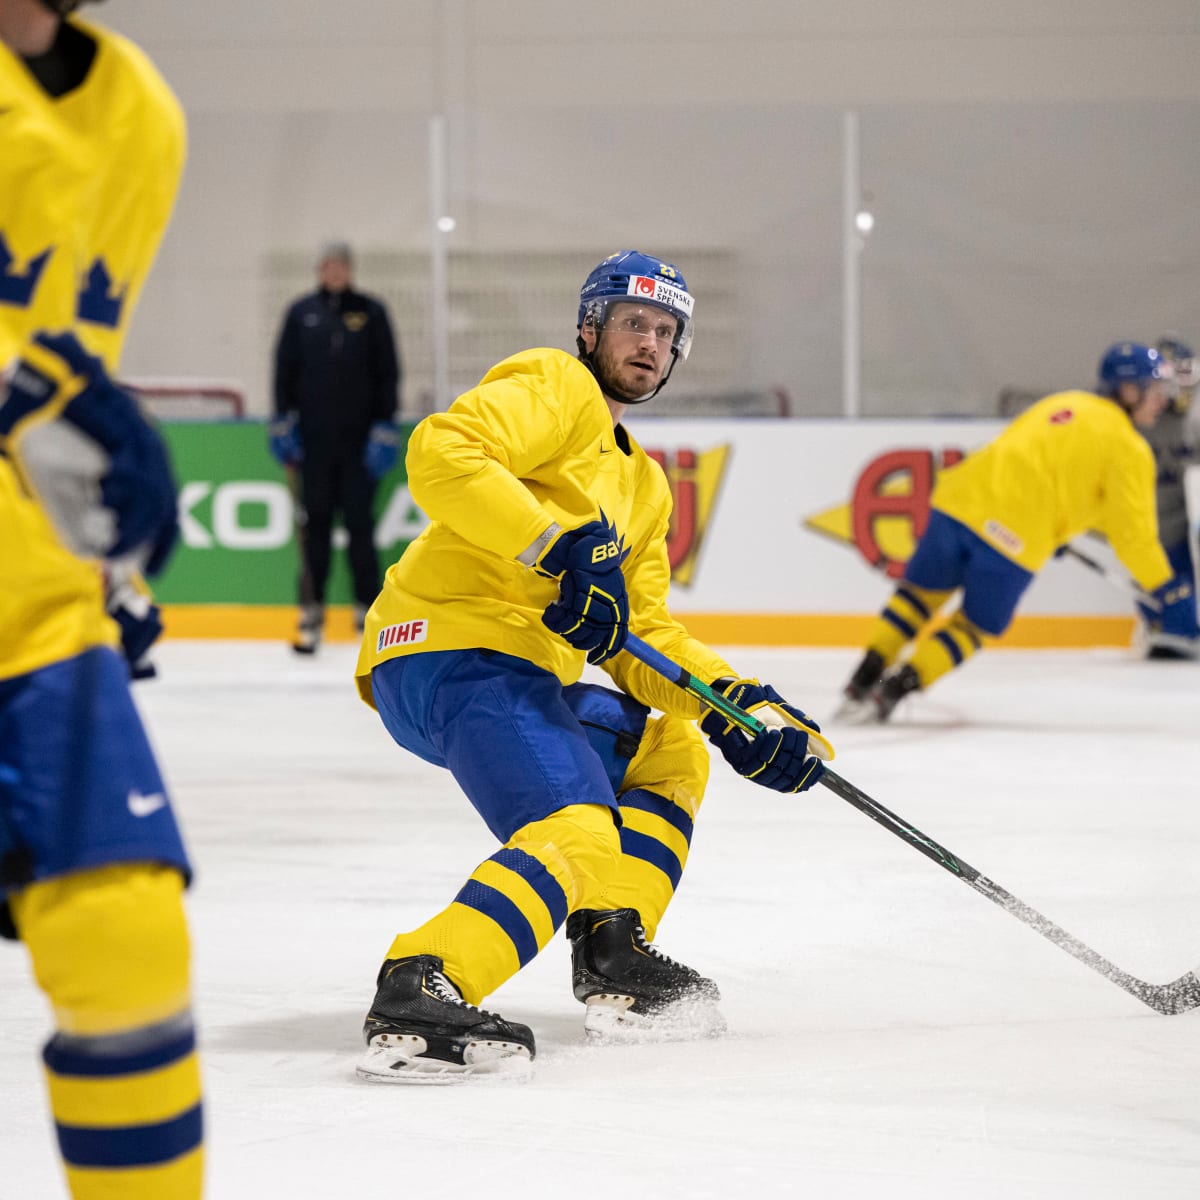 Watch Canada vs Sweden Stream Hlinka Gretzky Cup live, TV channel - How to Watch and Stream Major League and College Sports